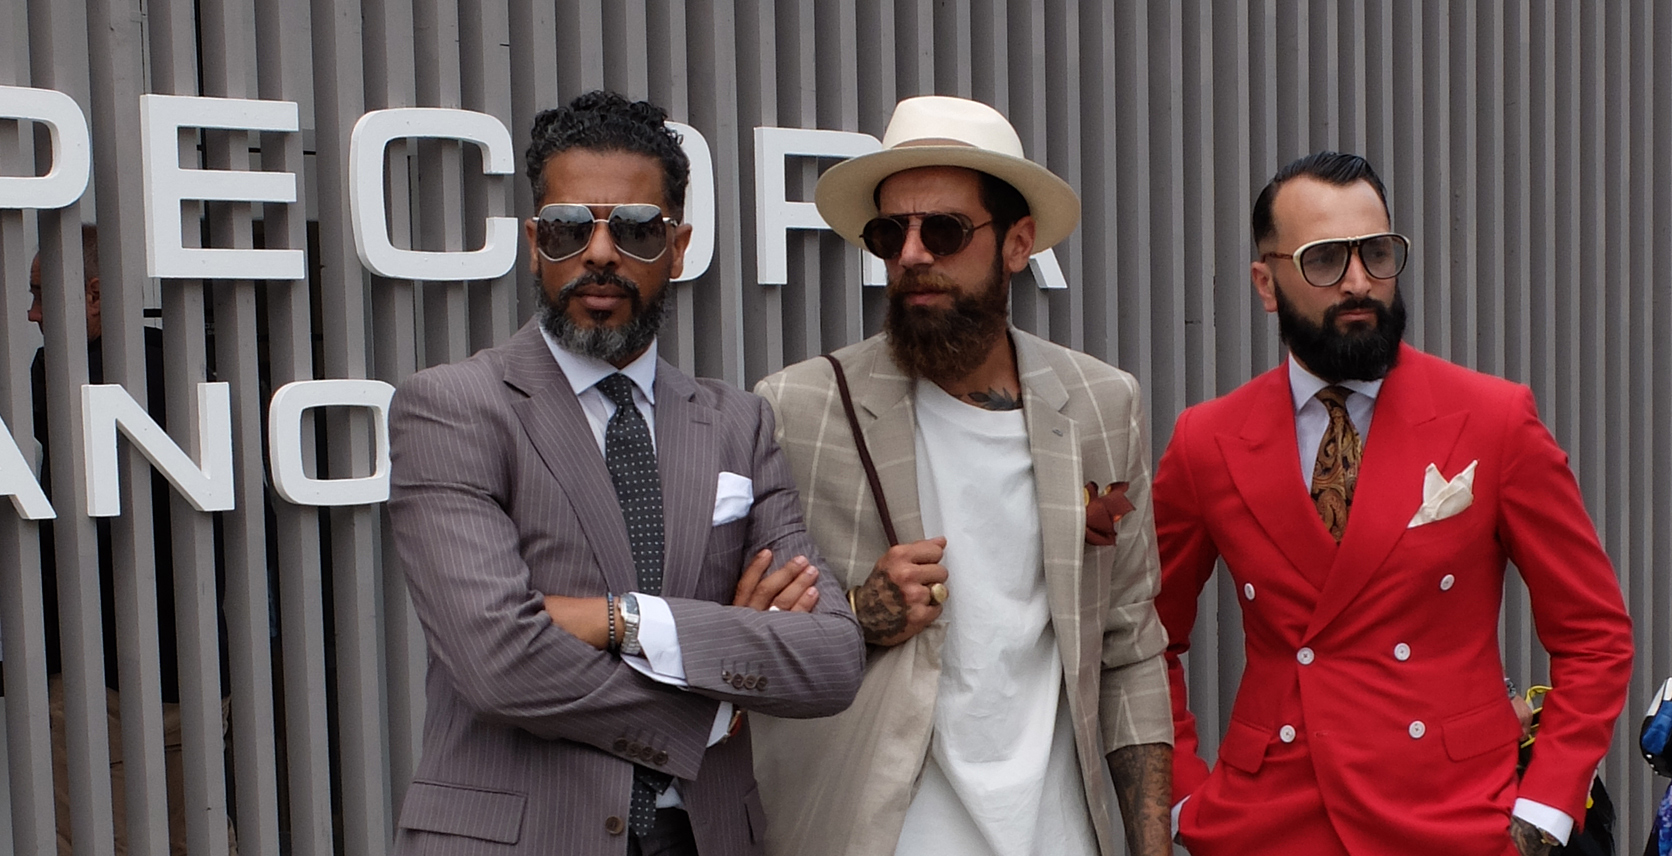 Pitti Uomo 92, tailoring, traditional, suits